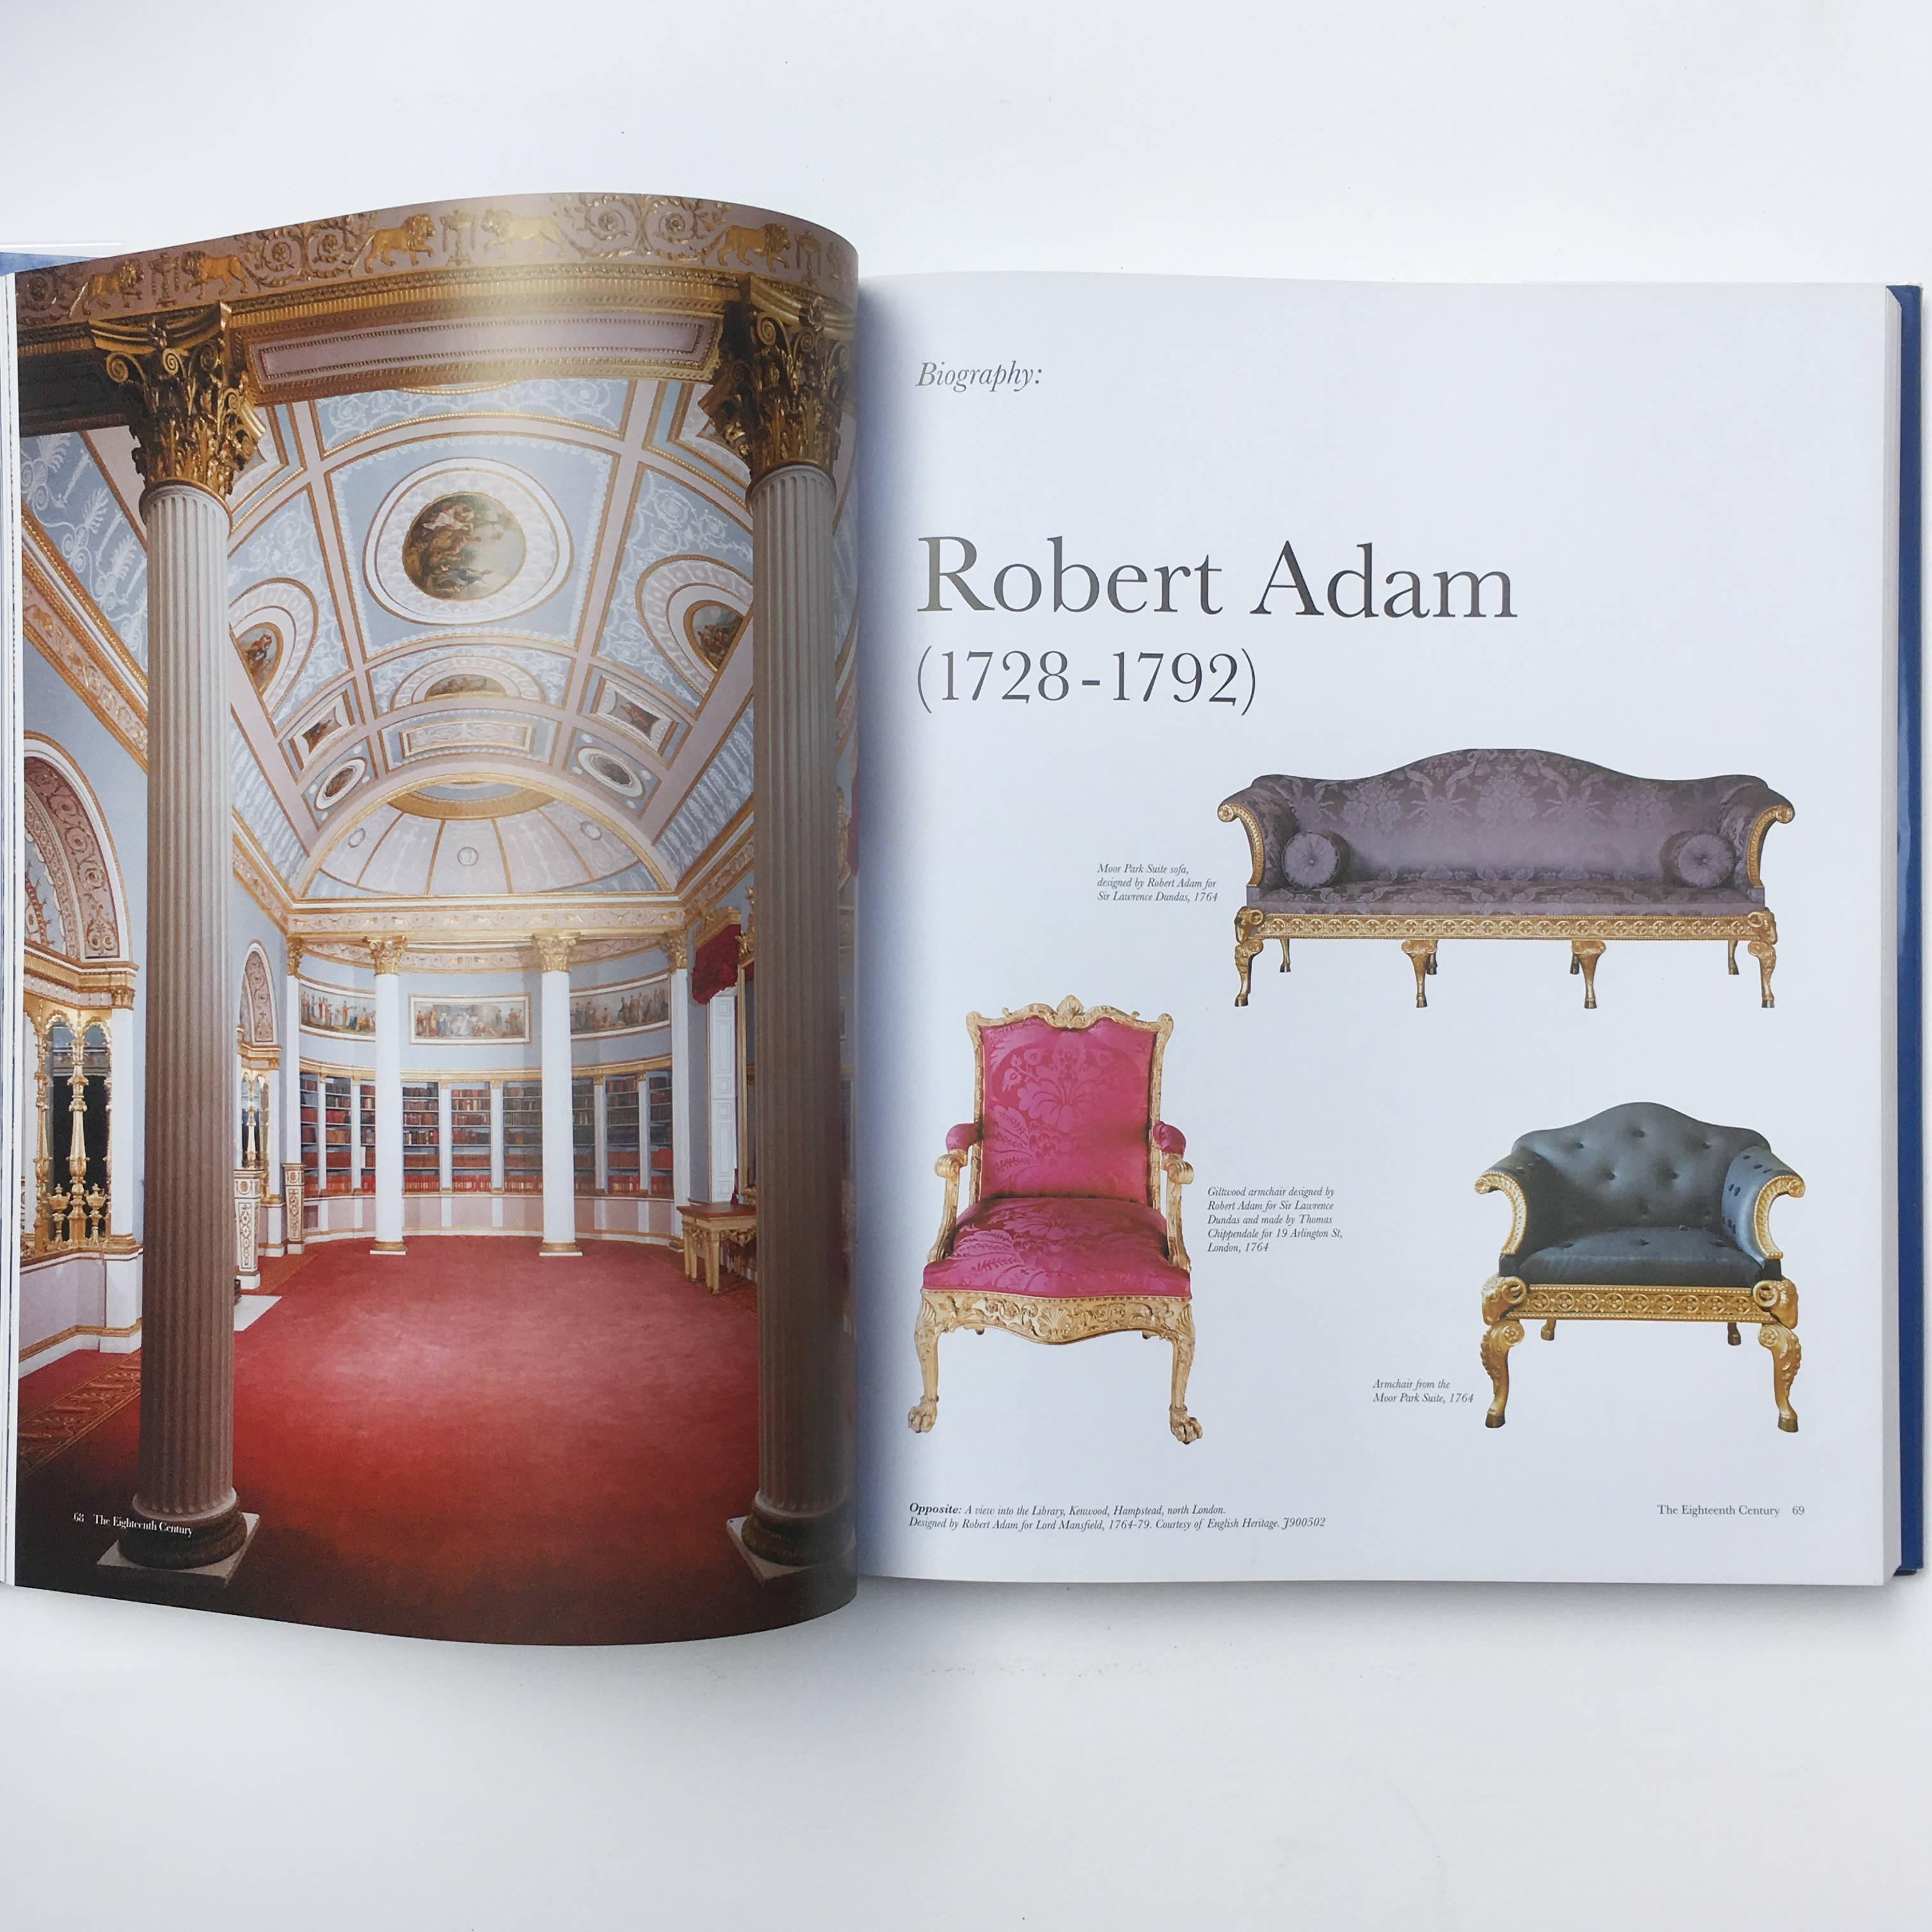 Published by The Intelligent Layman Publishers Ltd, 2005

An illustrated history of British furniture from 1600-2000. Arranged by movement and designers’ name, this clear yet academic illustrated study gives a perfect introduction into British